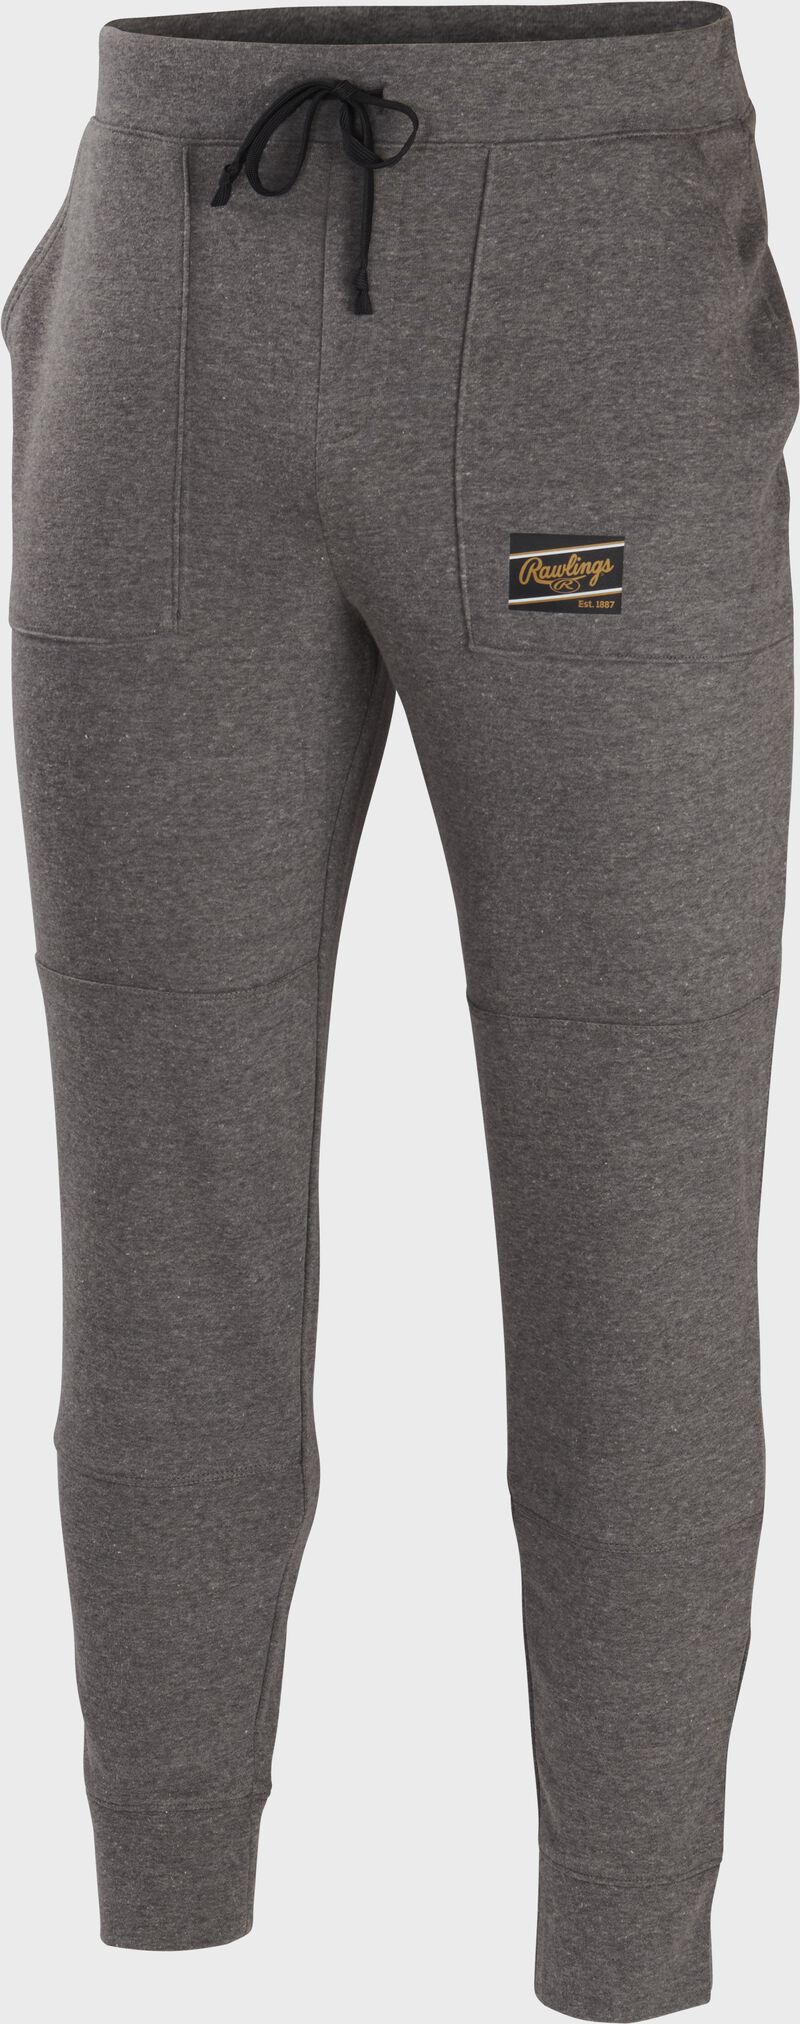 A Gray pair of Rawlings men's french terry joggers - SKU: RSGJG-G